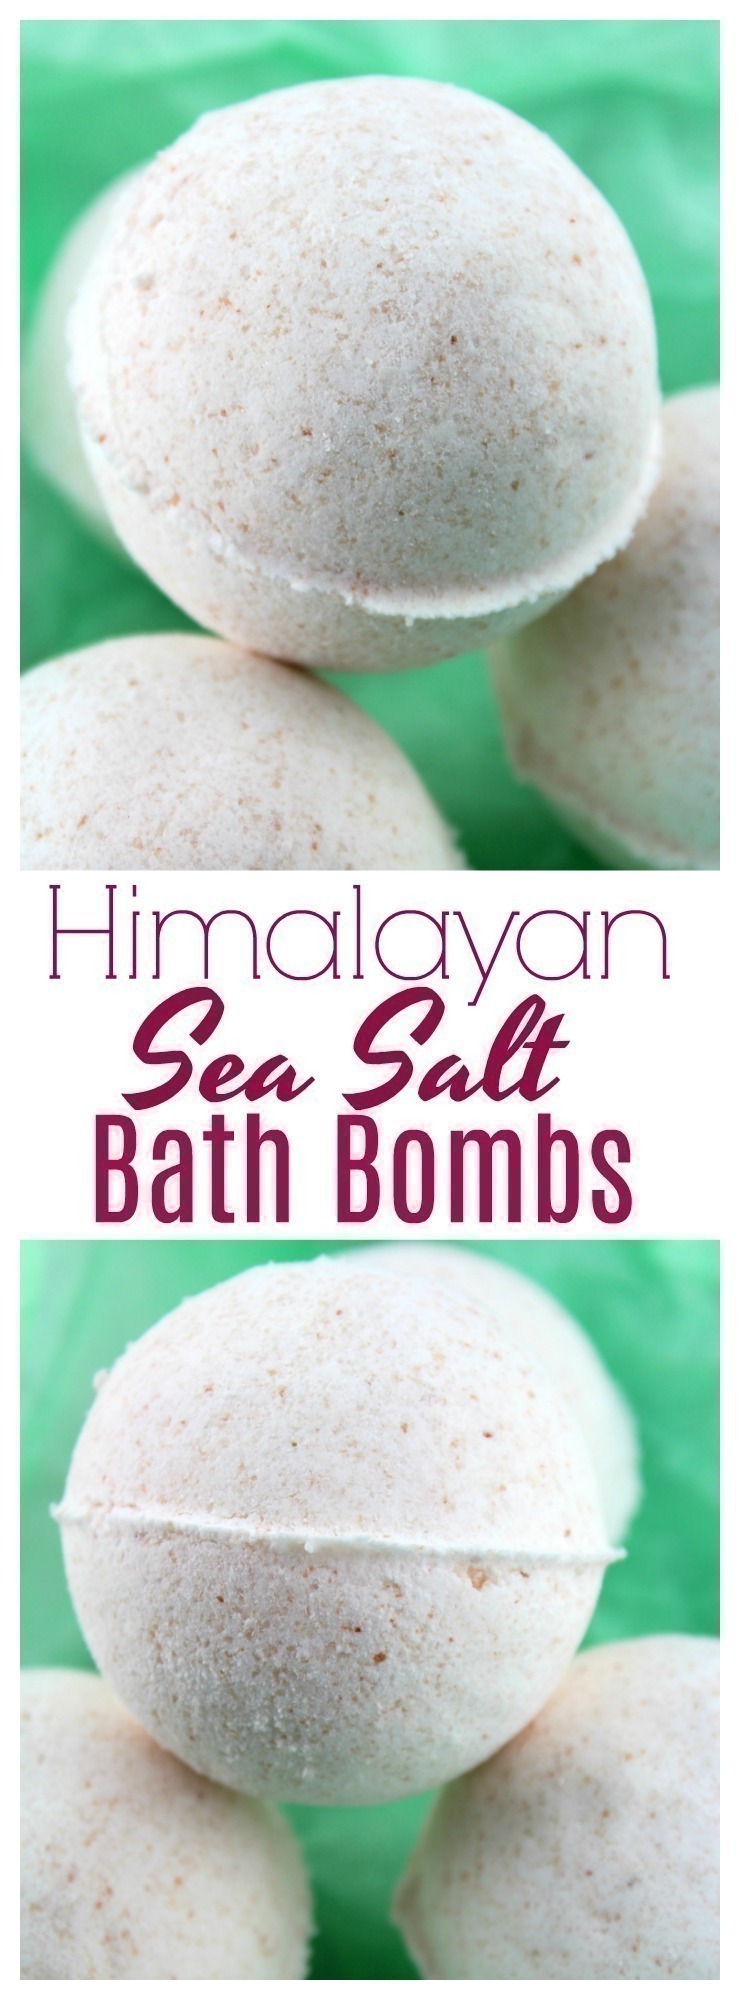 These Pink Himalayan Salt Bath Bombs are SO easy to DIY and they make wonderful gifts for friends and family!